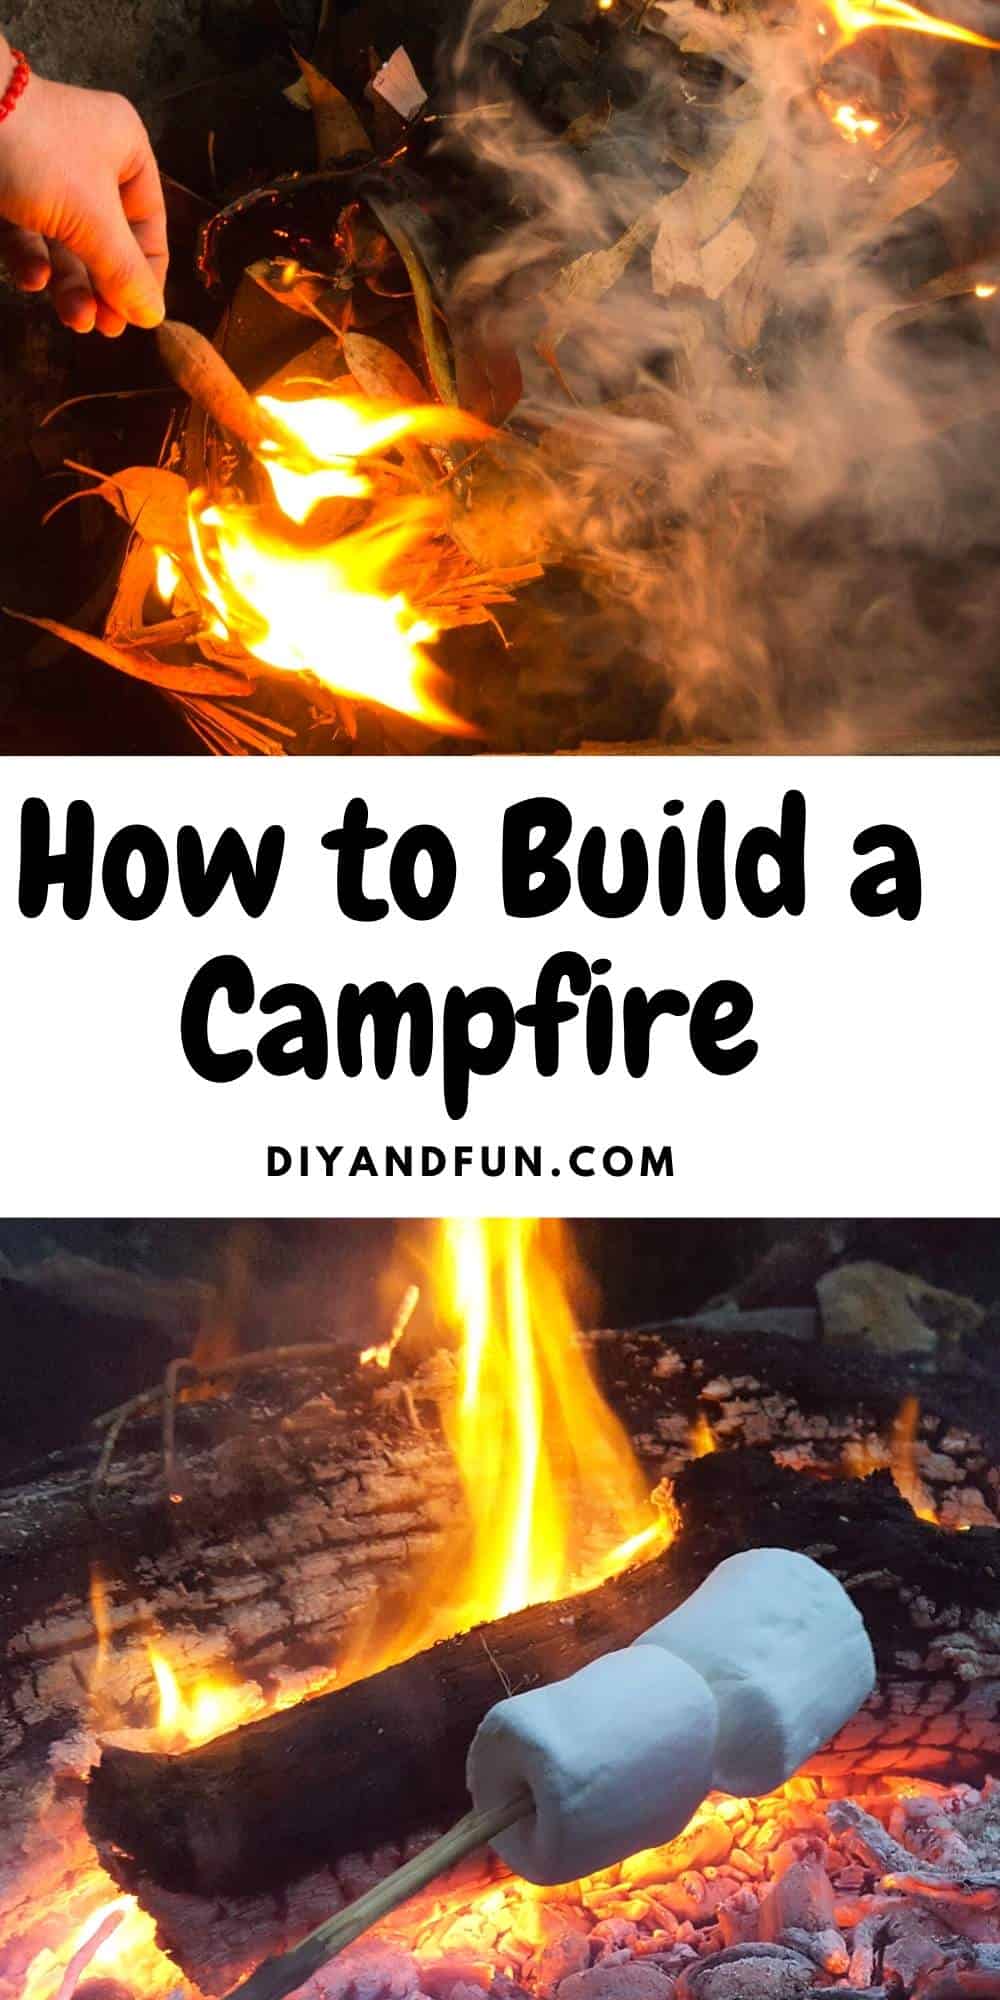 How to Build a Campfire, a simple guide for beginners on how to prepare for a campfire, the best wood to use, and keeping safe.